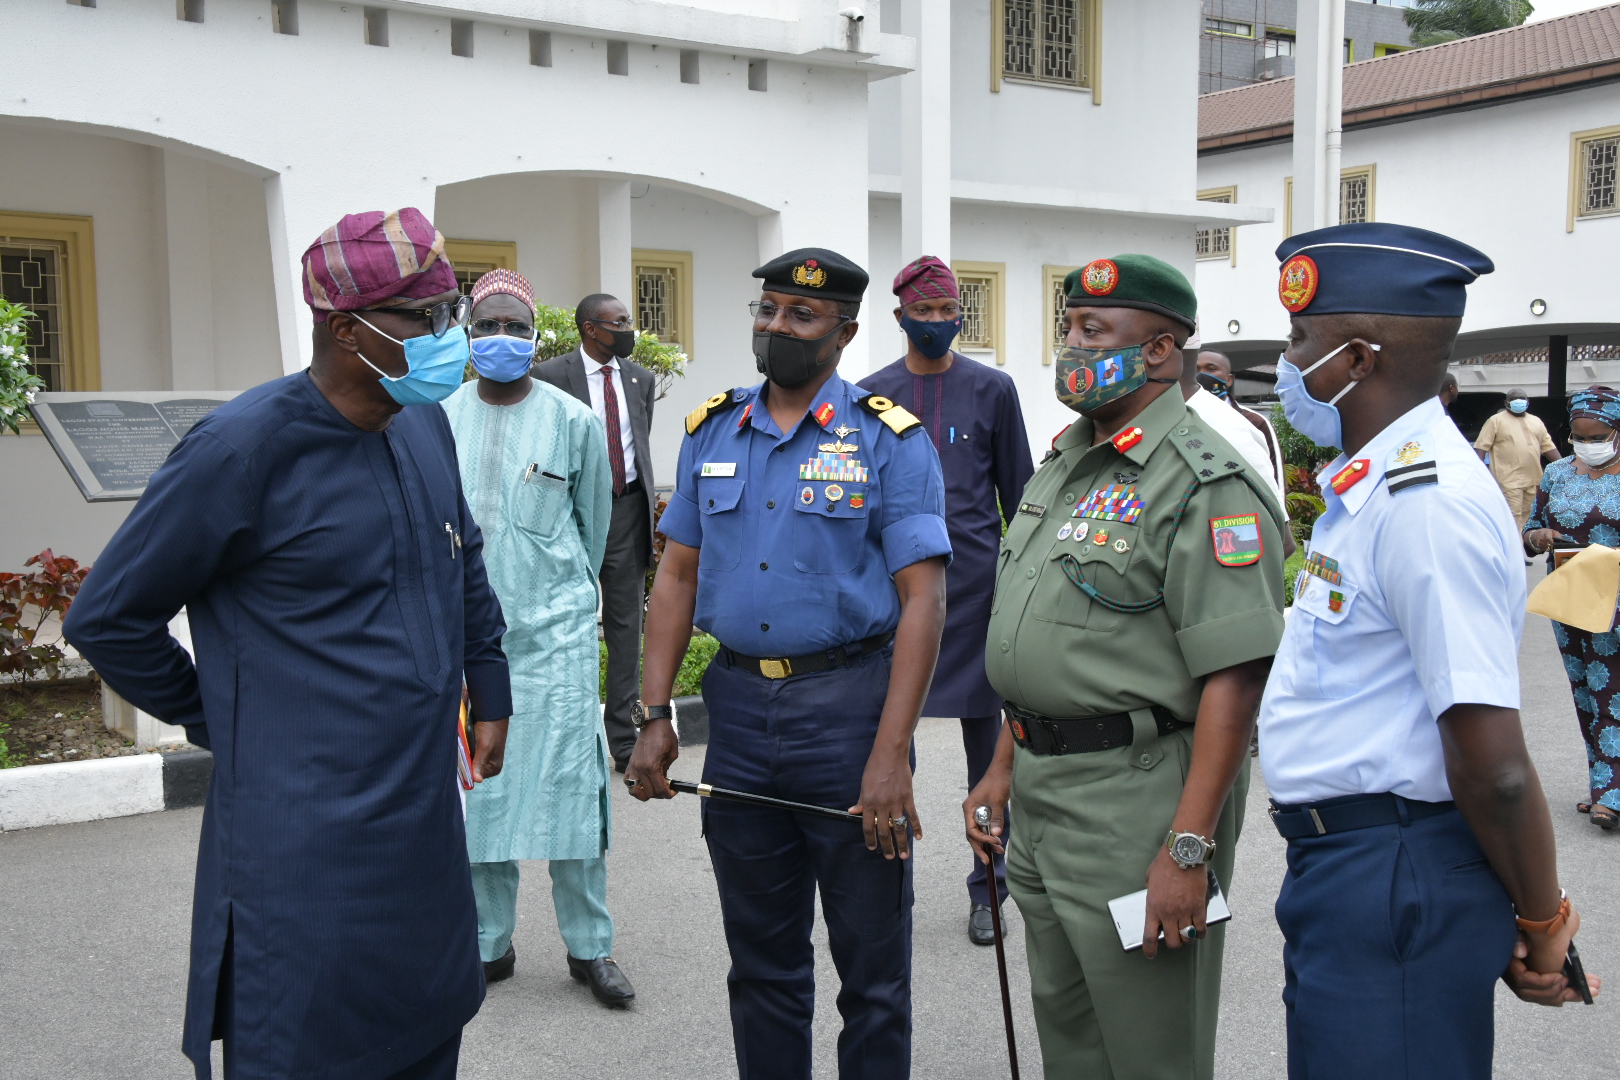 GOV. SANWO-OLU PRESIDES AT THE STATE SECURITY COUNCIL MEETING HELD AT LAGOS HOUSE, MARINA ON MONDAY, AUGUST 3 2020.